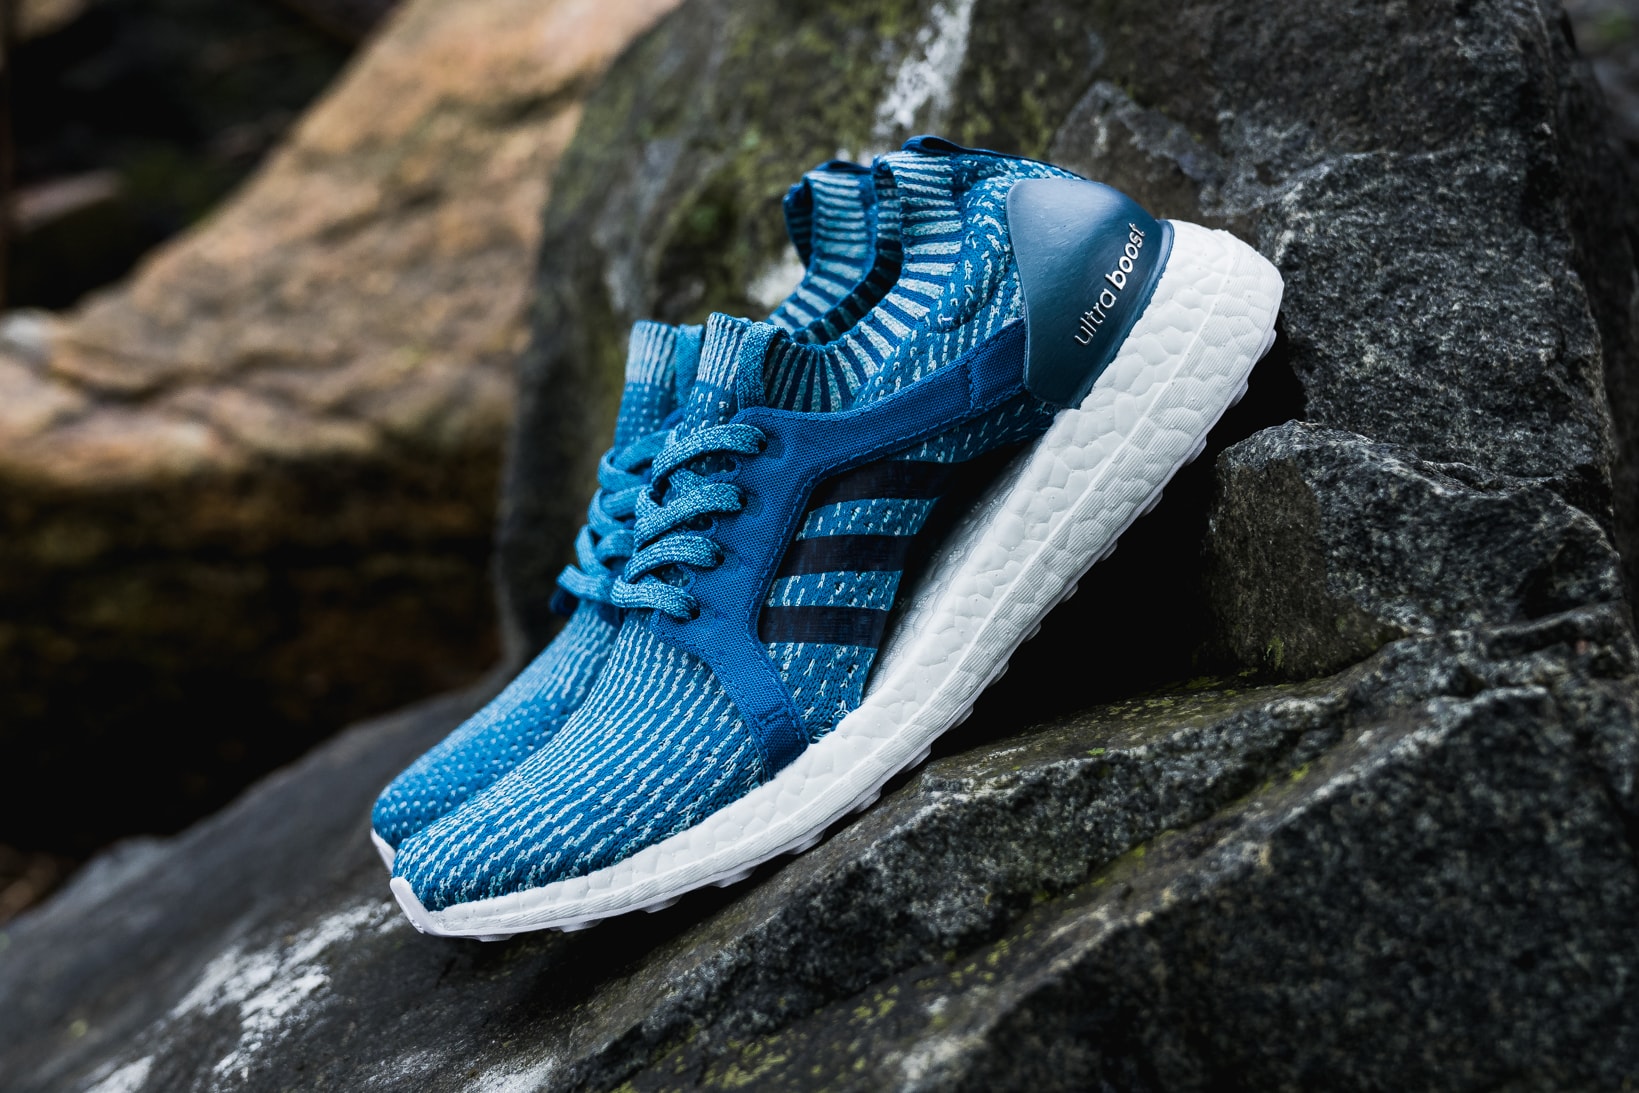 adidas x Parley for the Oceans UltraBOOST X Closer Look